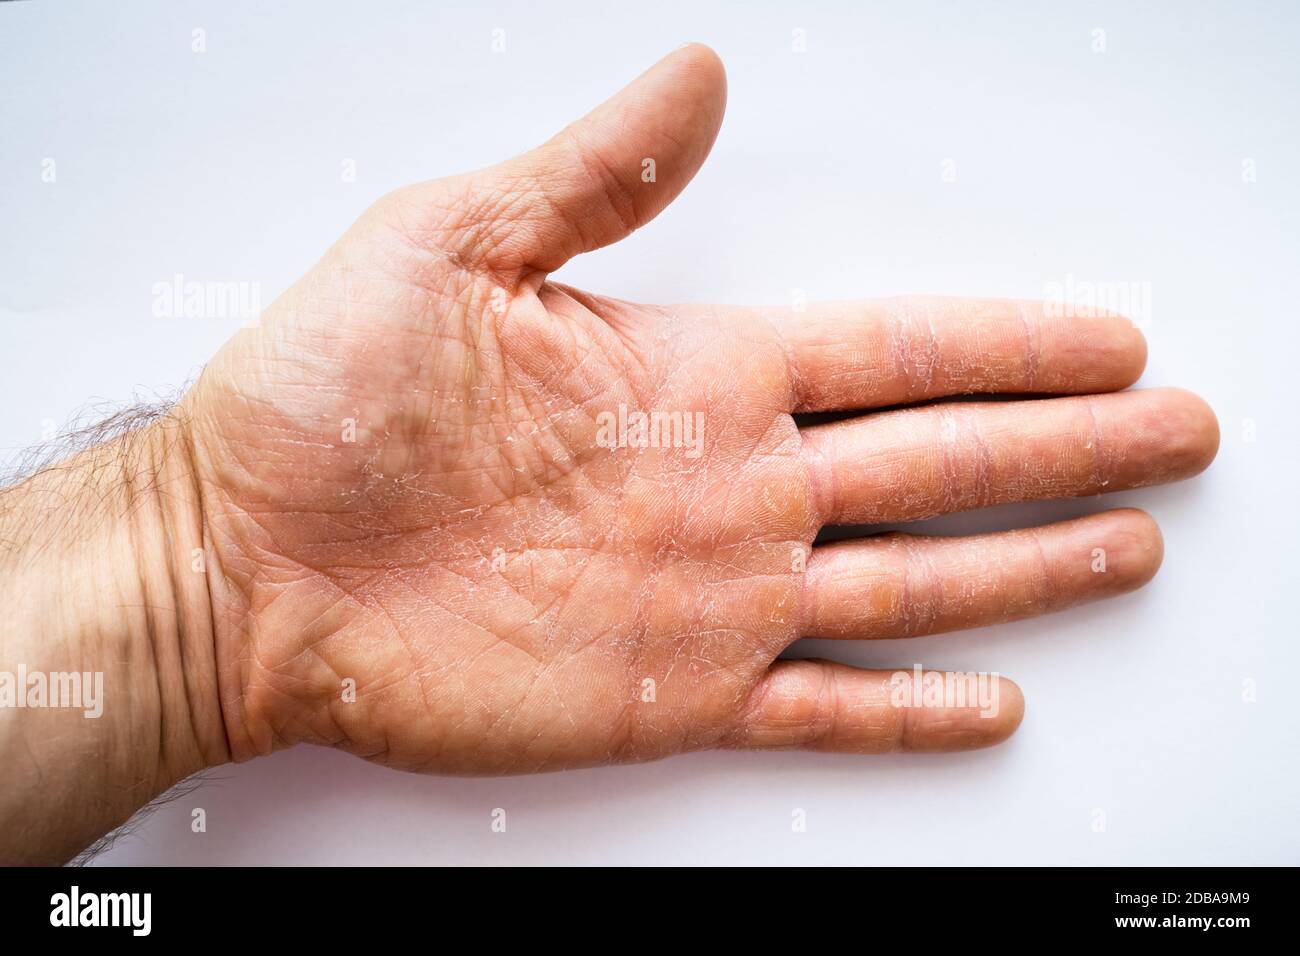 Peeling hands: Causes, treatments, and more